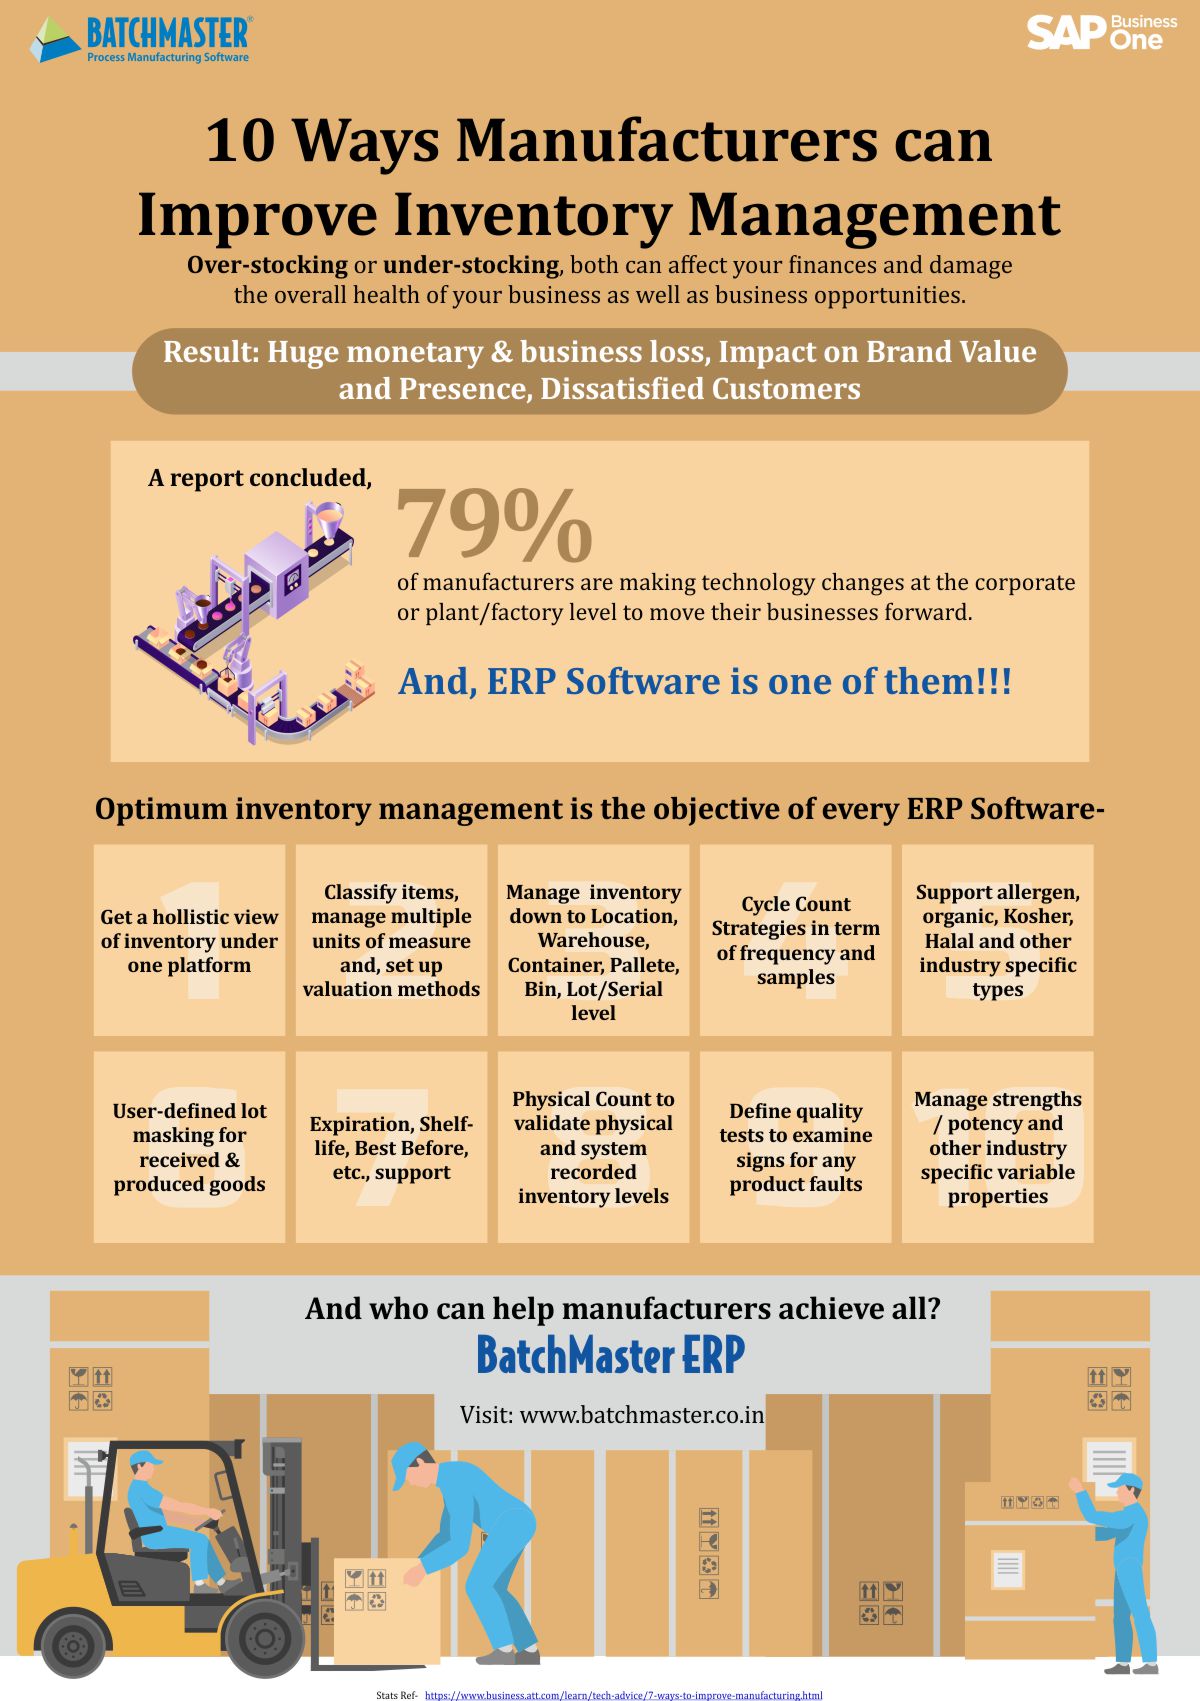 Ten ways manufacturers can improve inventory management infographic